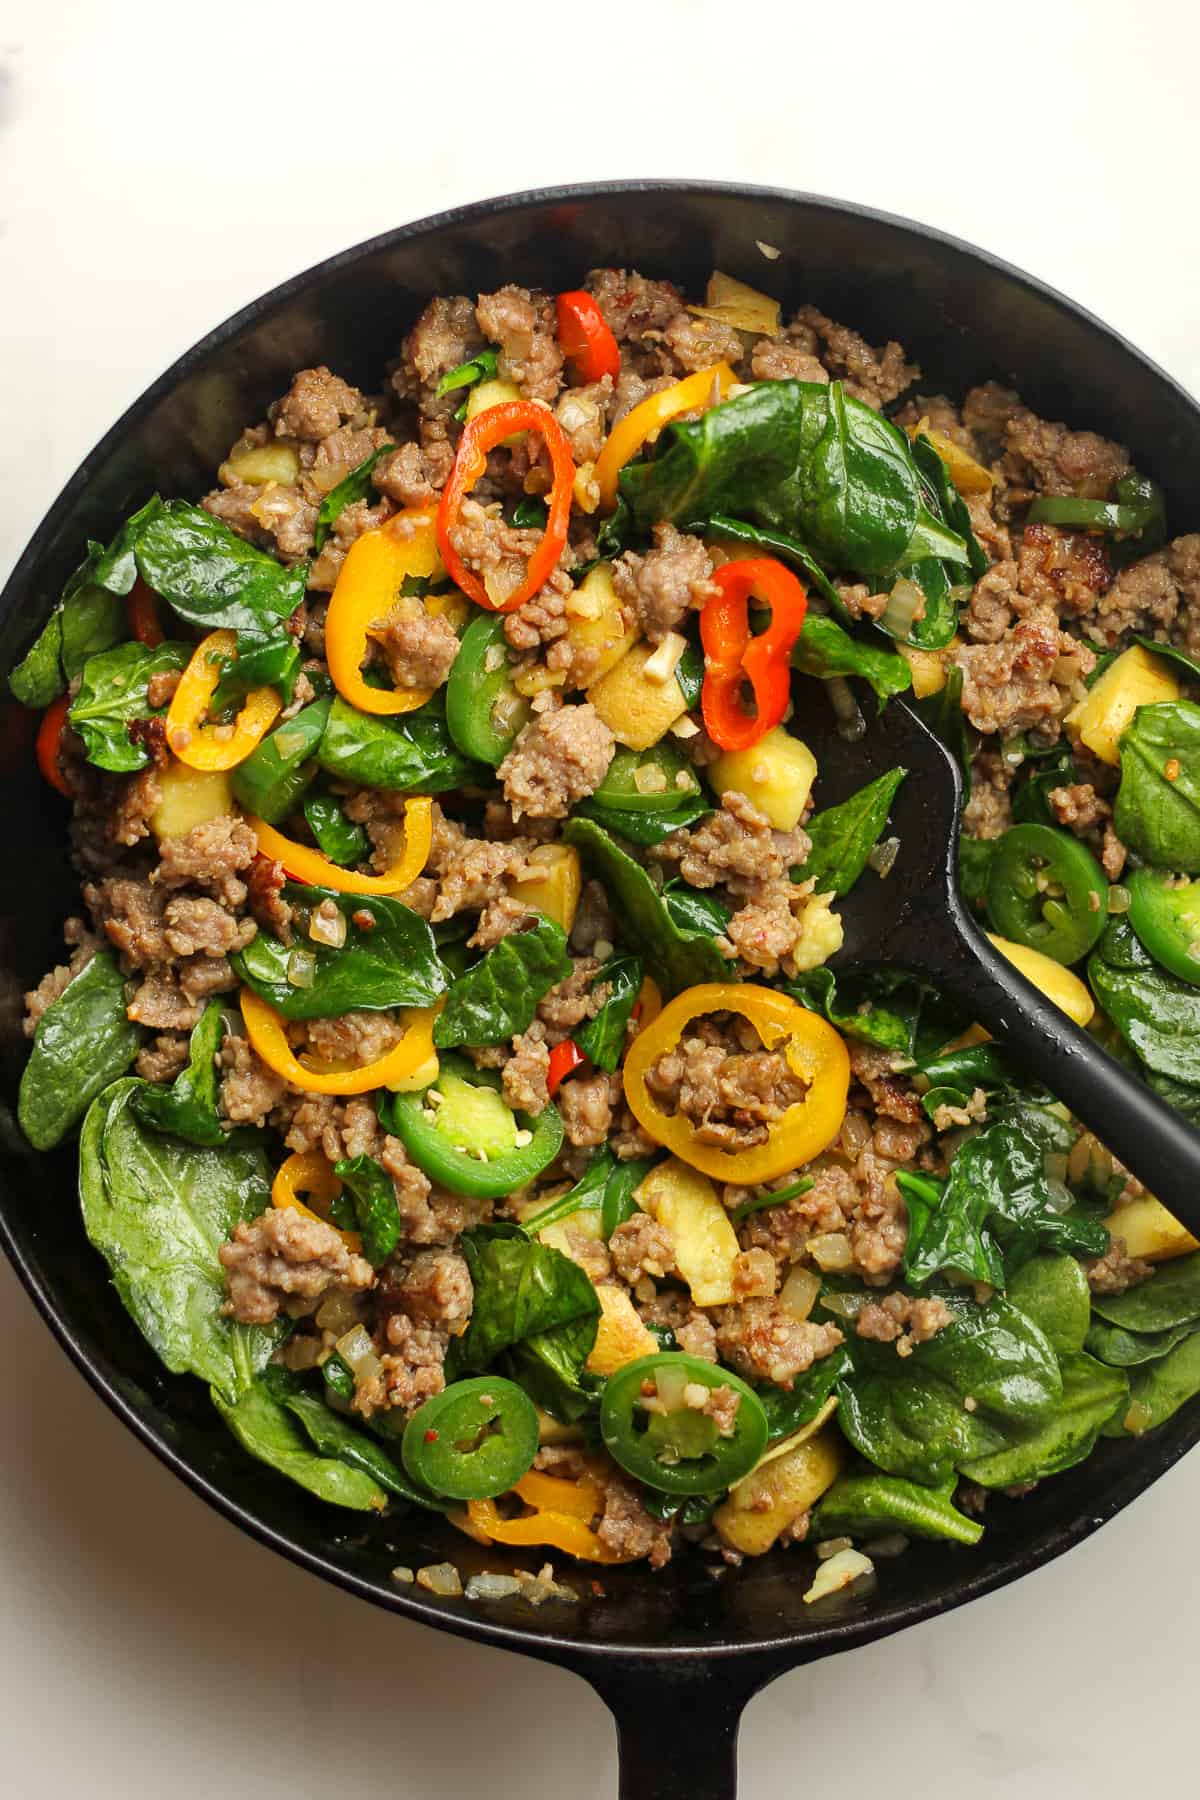 A skillet of the sausage, veggies, with spinach added in.